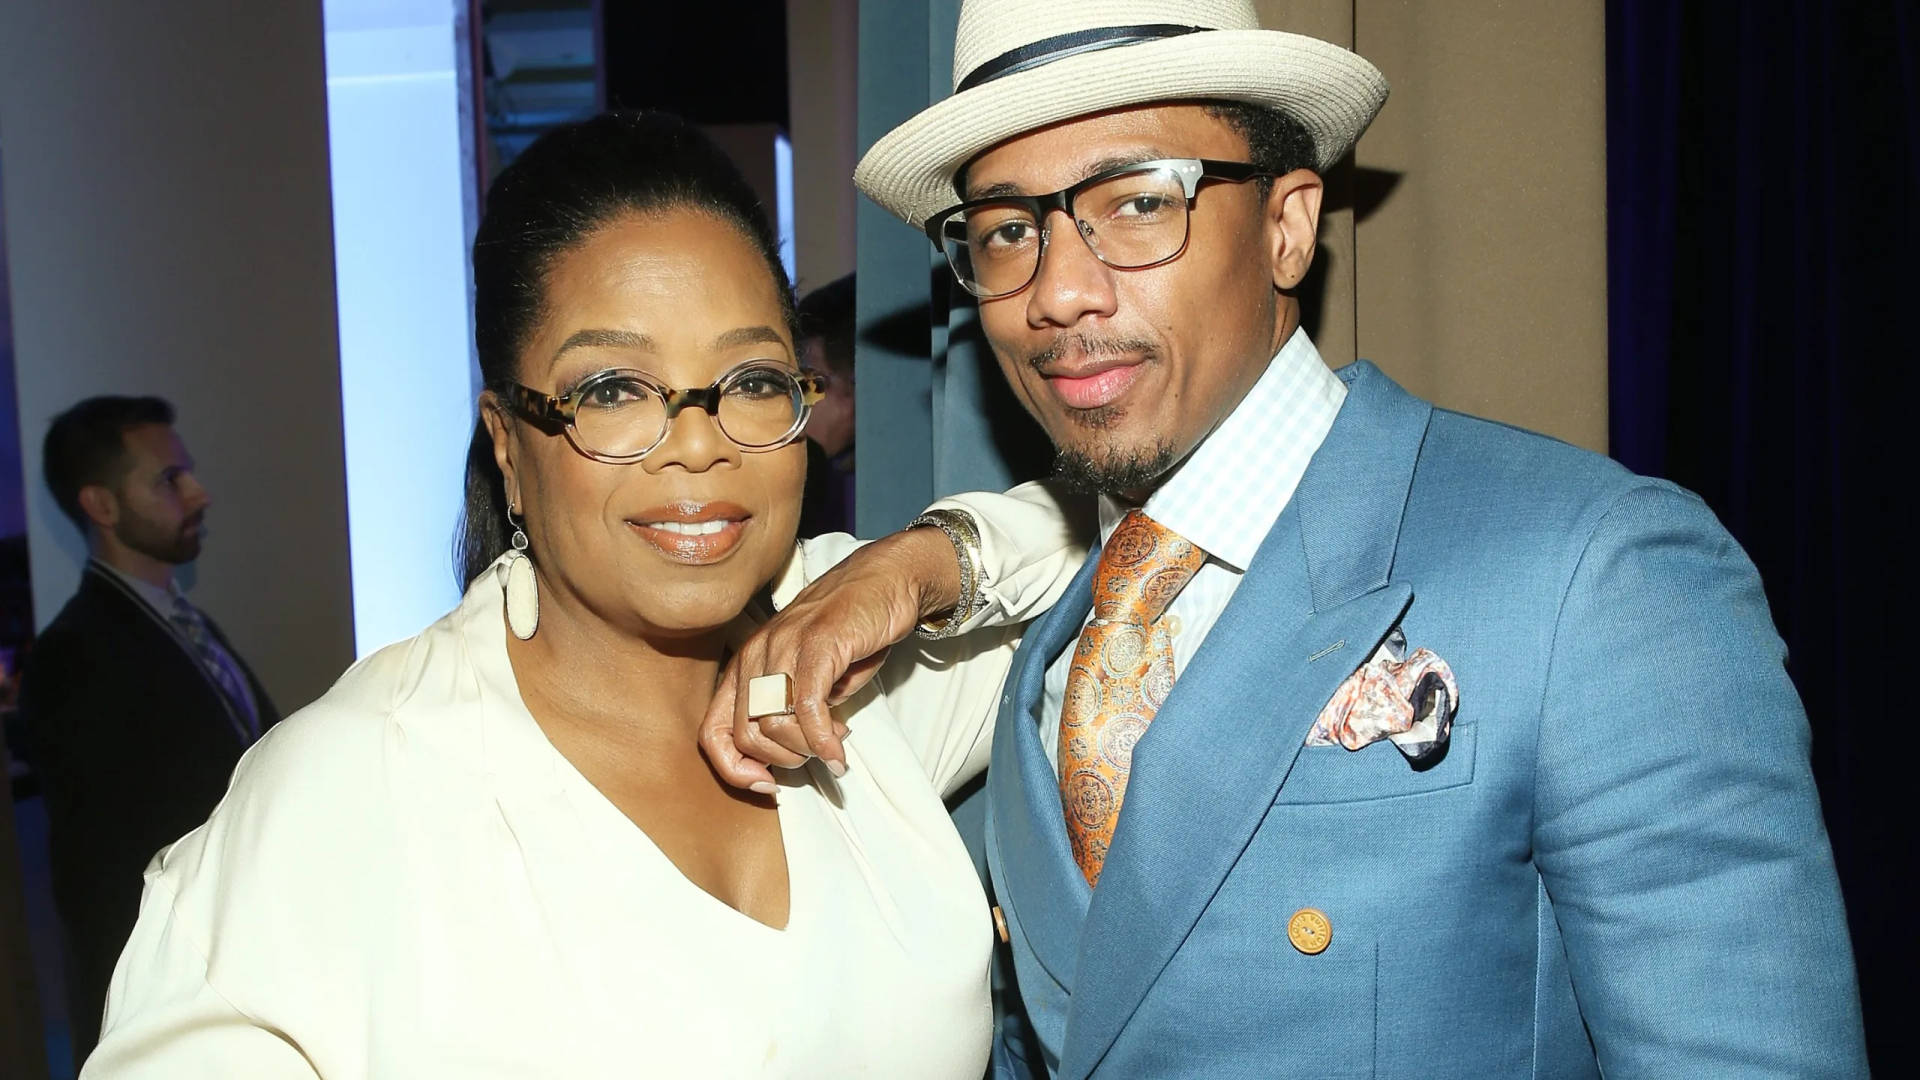 Nick Cannon With Oprah Background